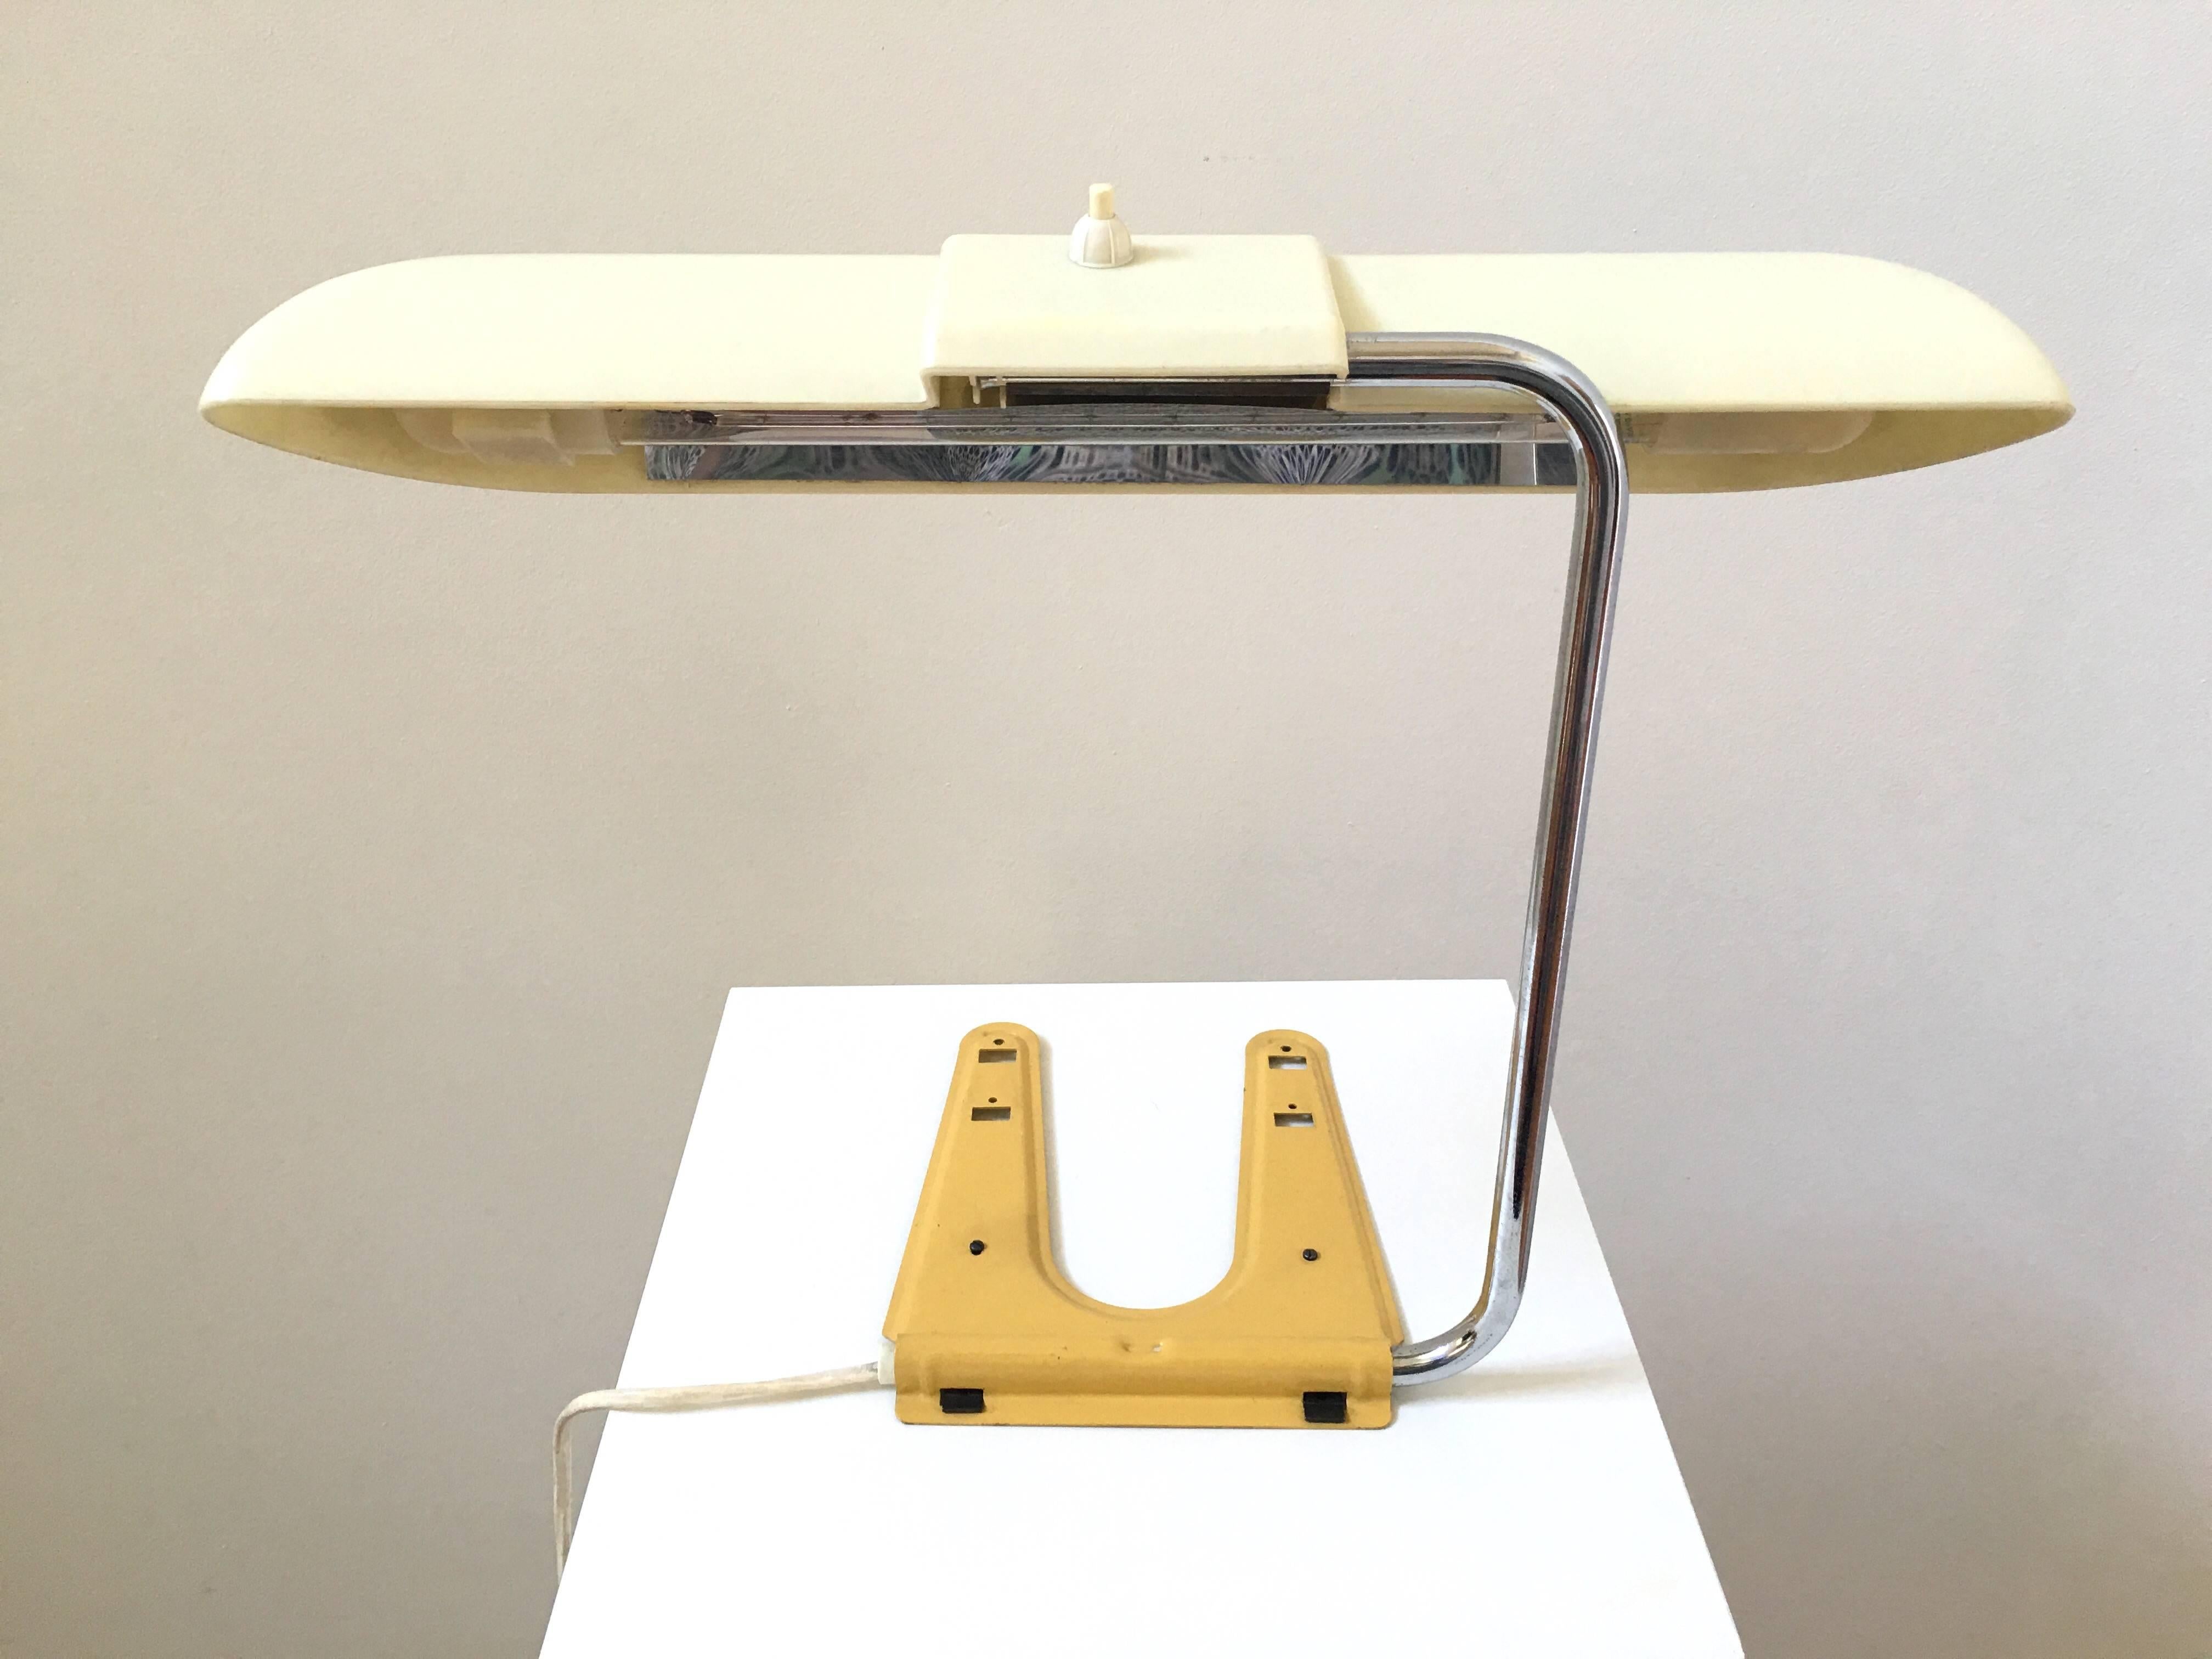 Charlotte Perriand Style Desk Lamp In Excellent Condition For Sale In Ashburn, VA